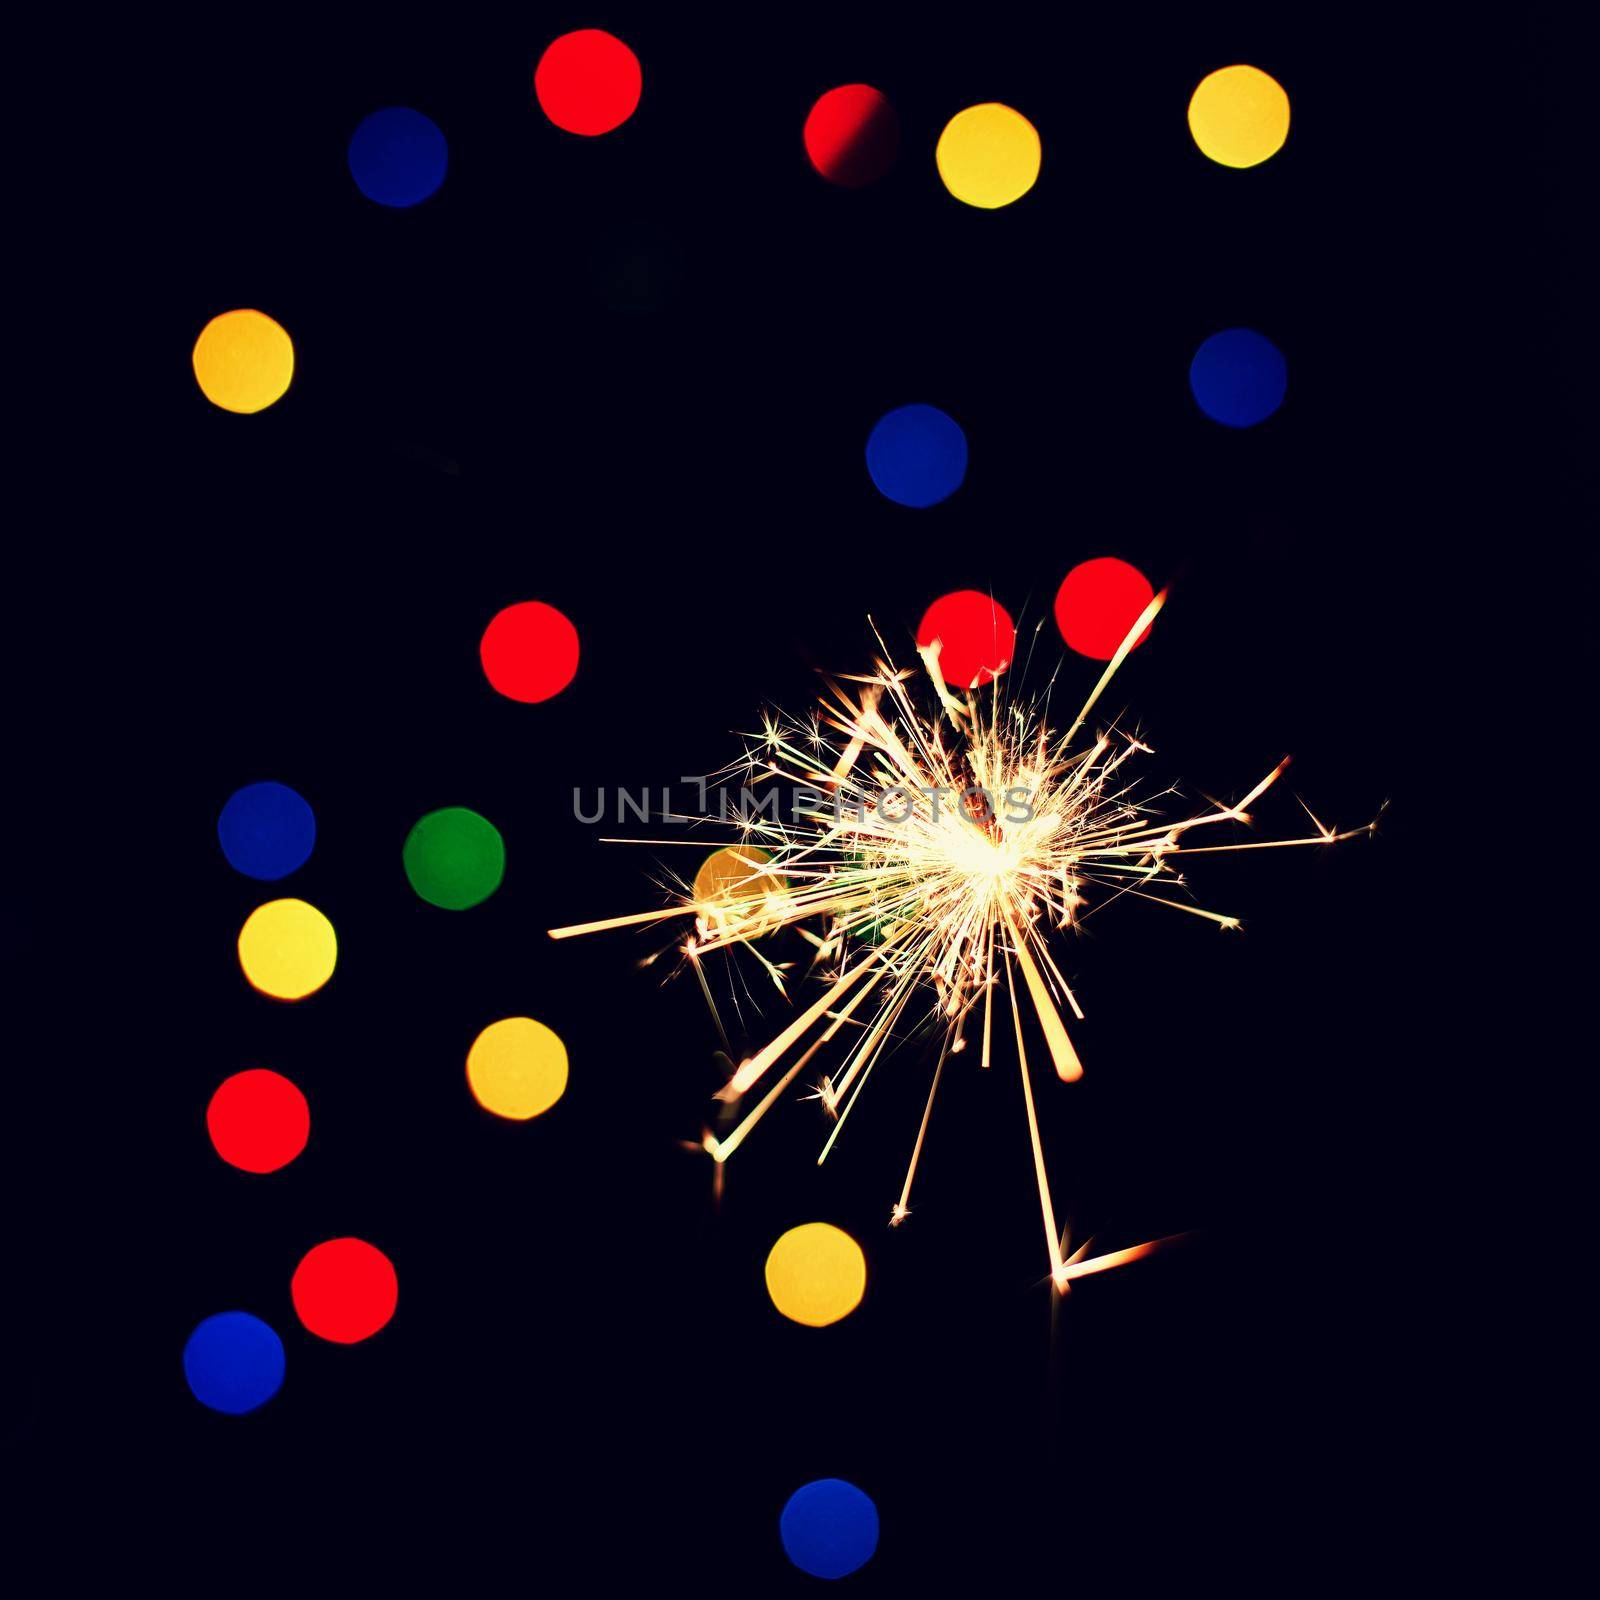 Sparkler with beautiful abstract colorful background. Concept for Christmas and Happy New Year 2021. by Montypeter